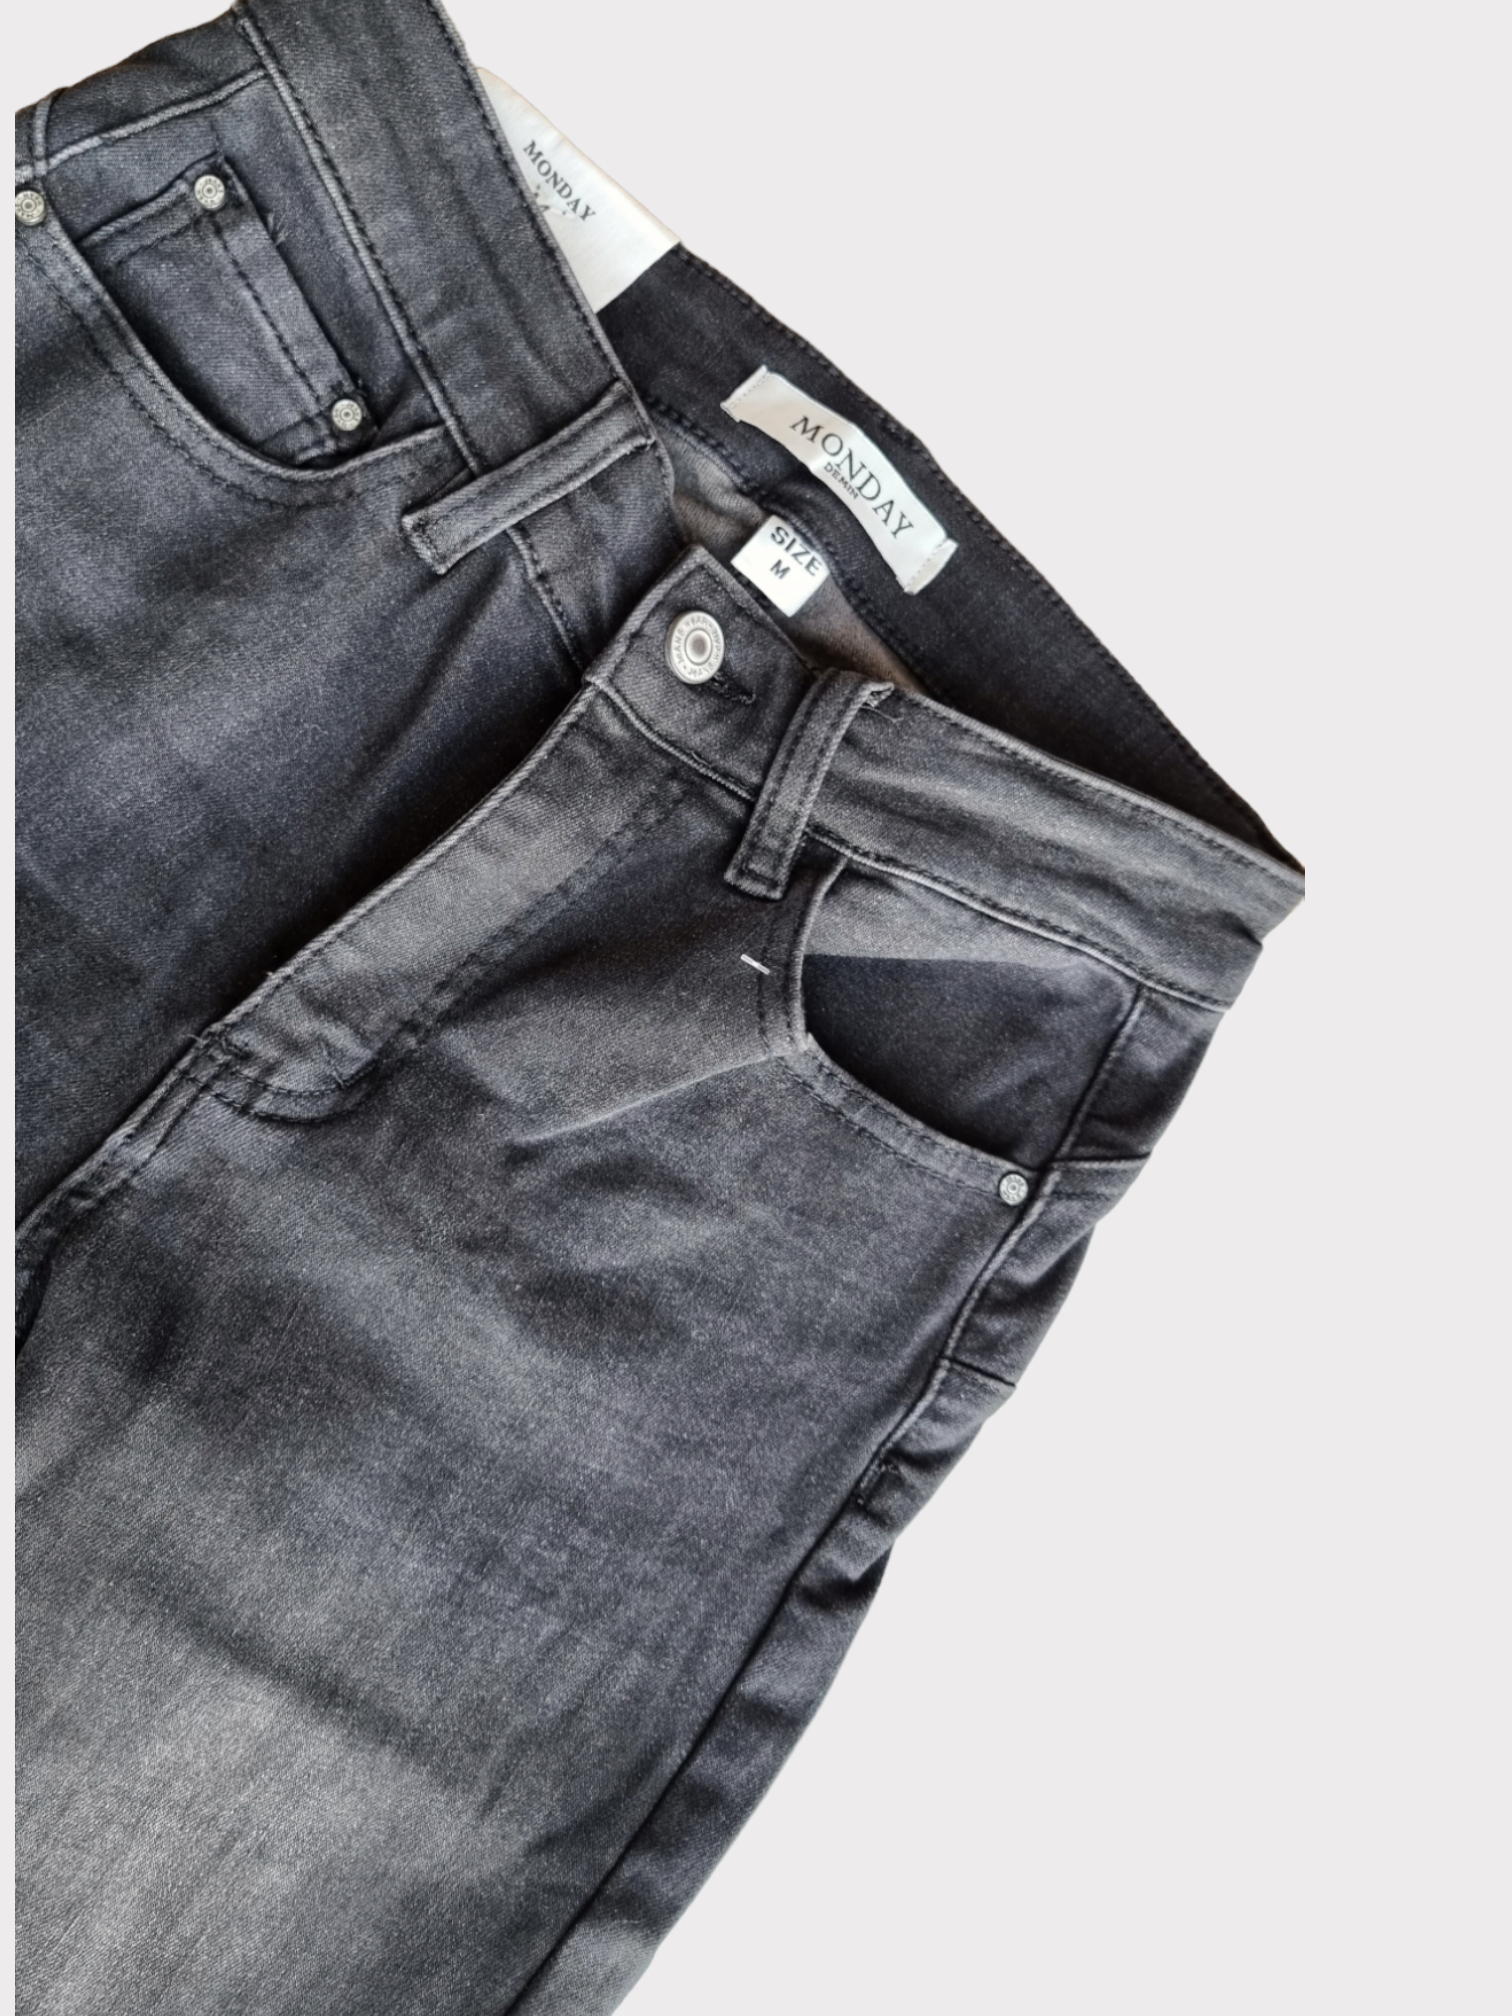 Jeans HOT - TrendJetter Lifestyle Store